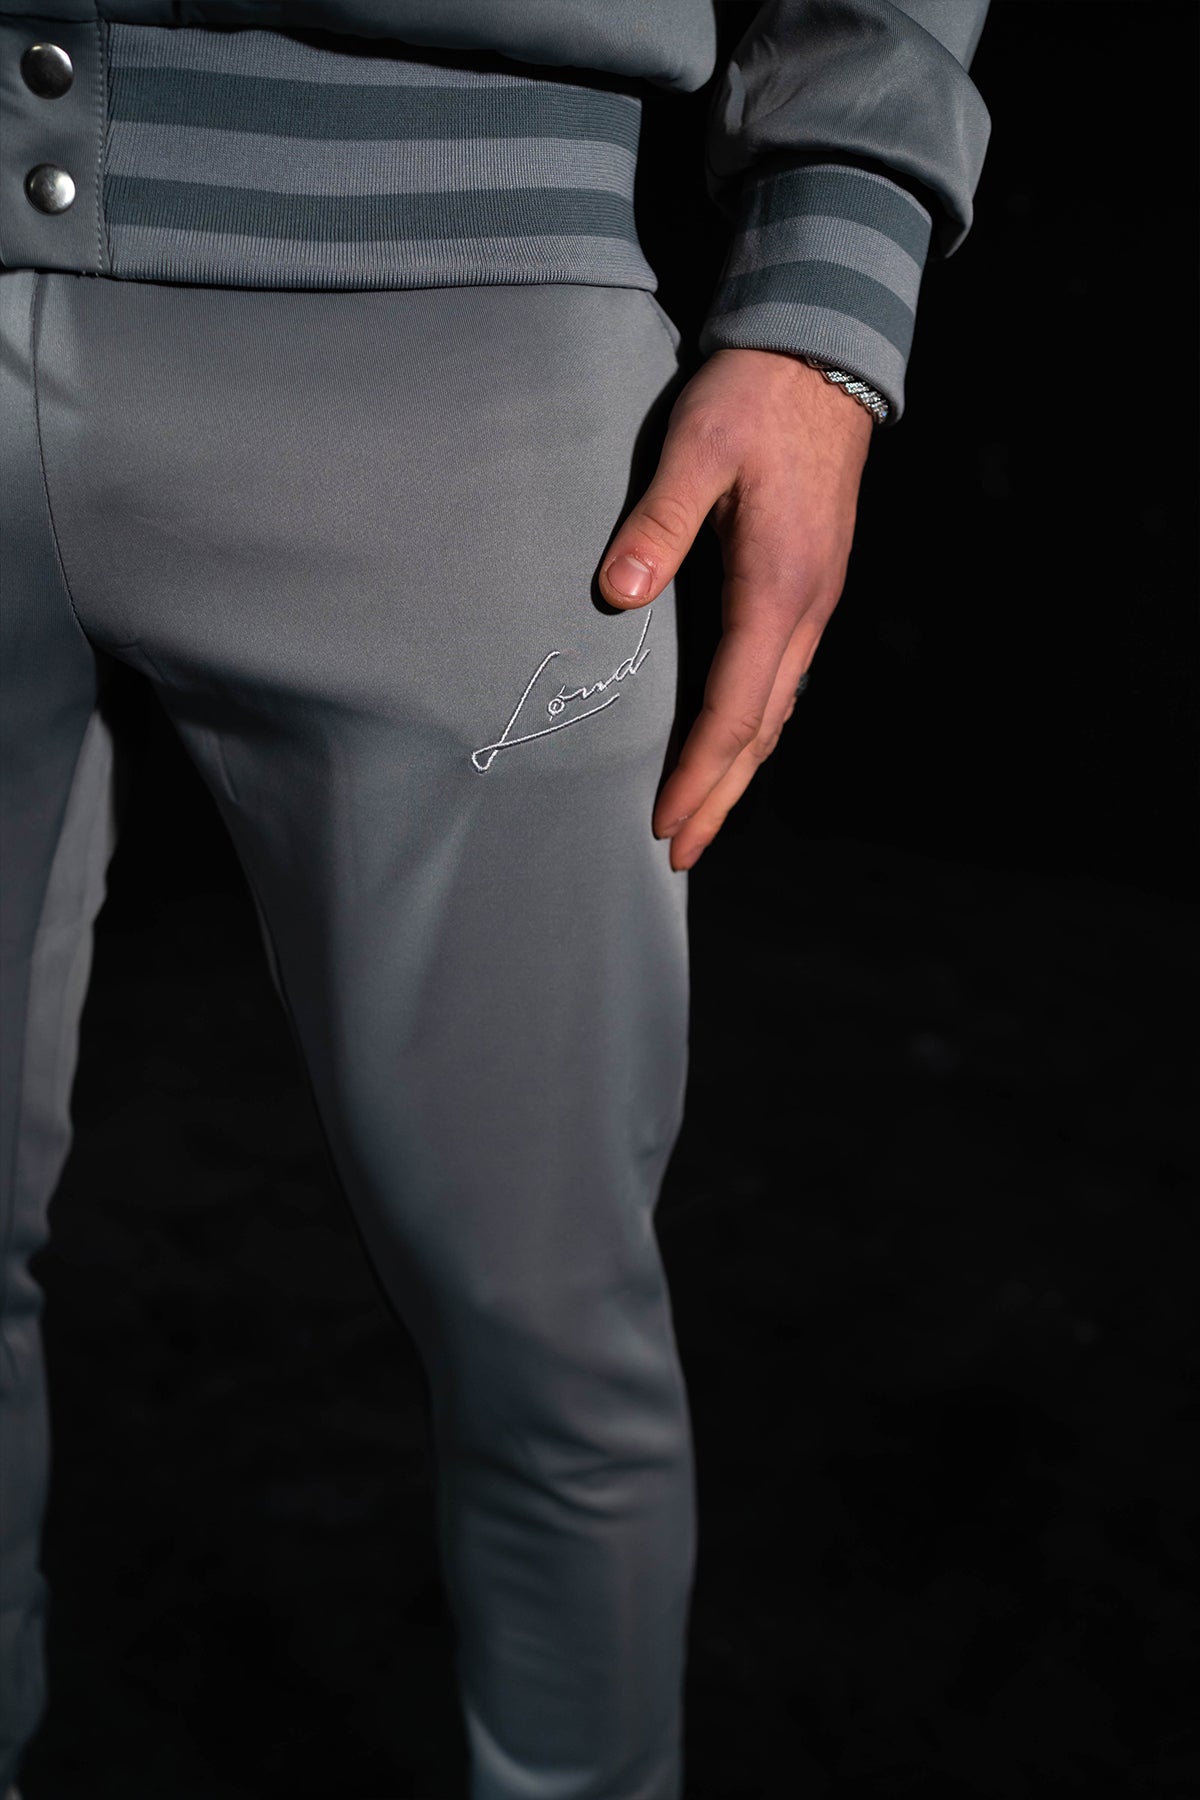 Loud Grey Embroidered Tracksuit - Live Look Loud